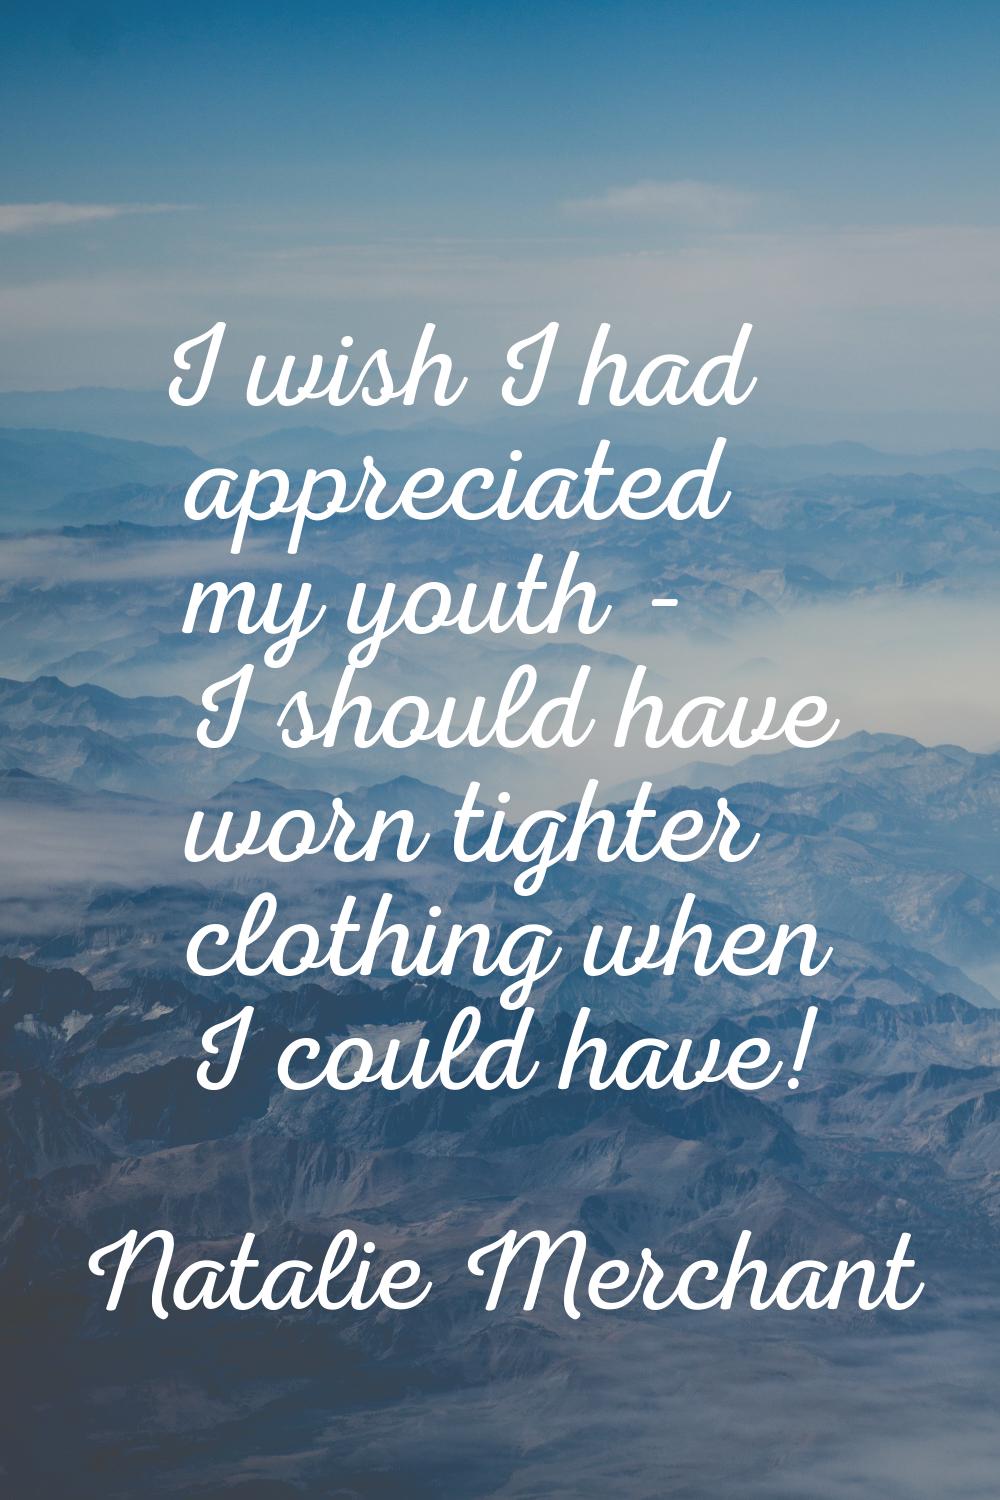 I wish I had appreciated my youth - I should have worn tighter clothing when I could have!